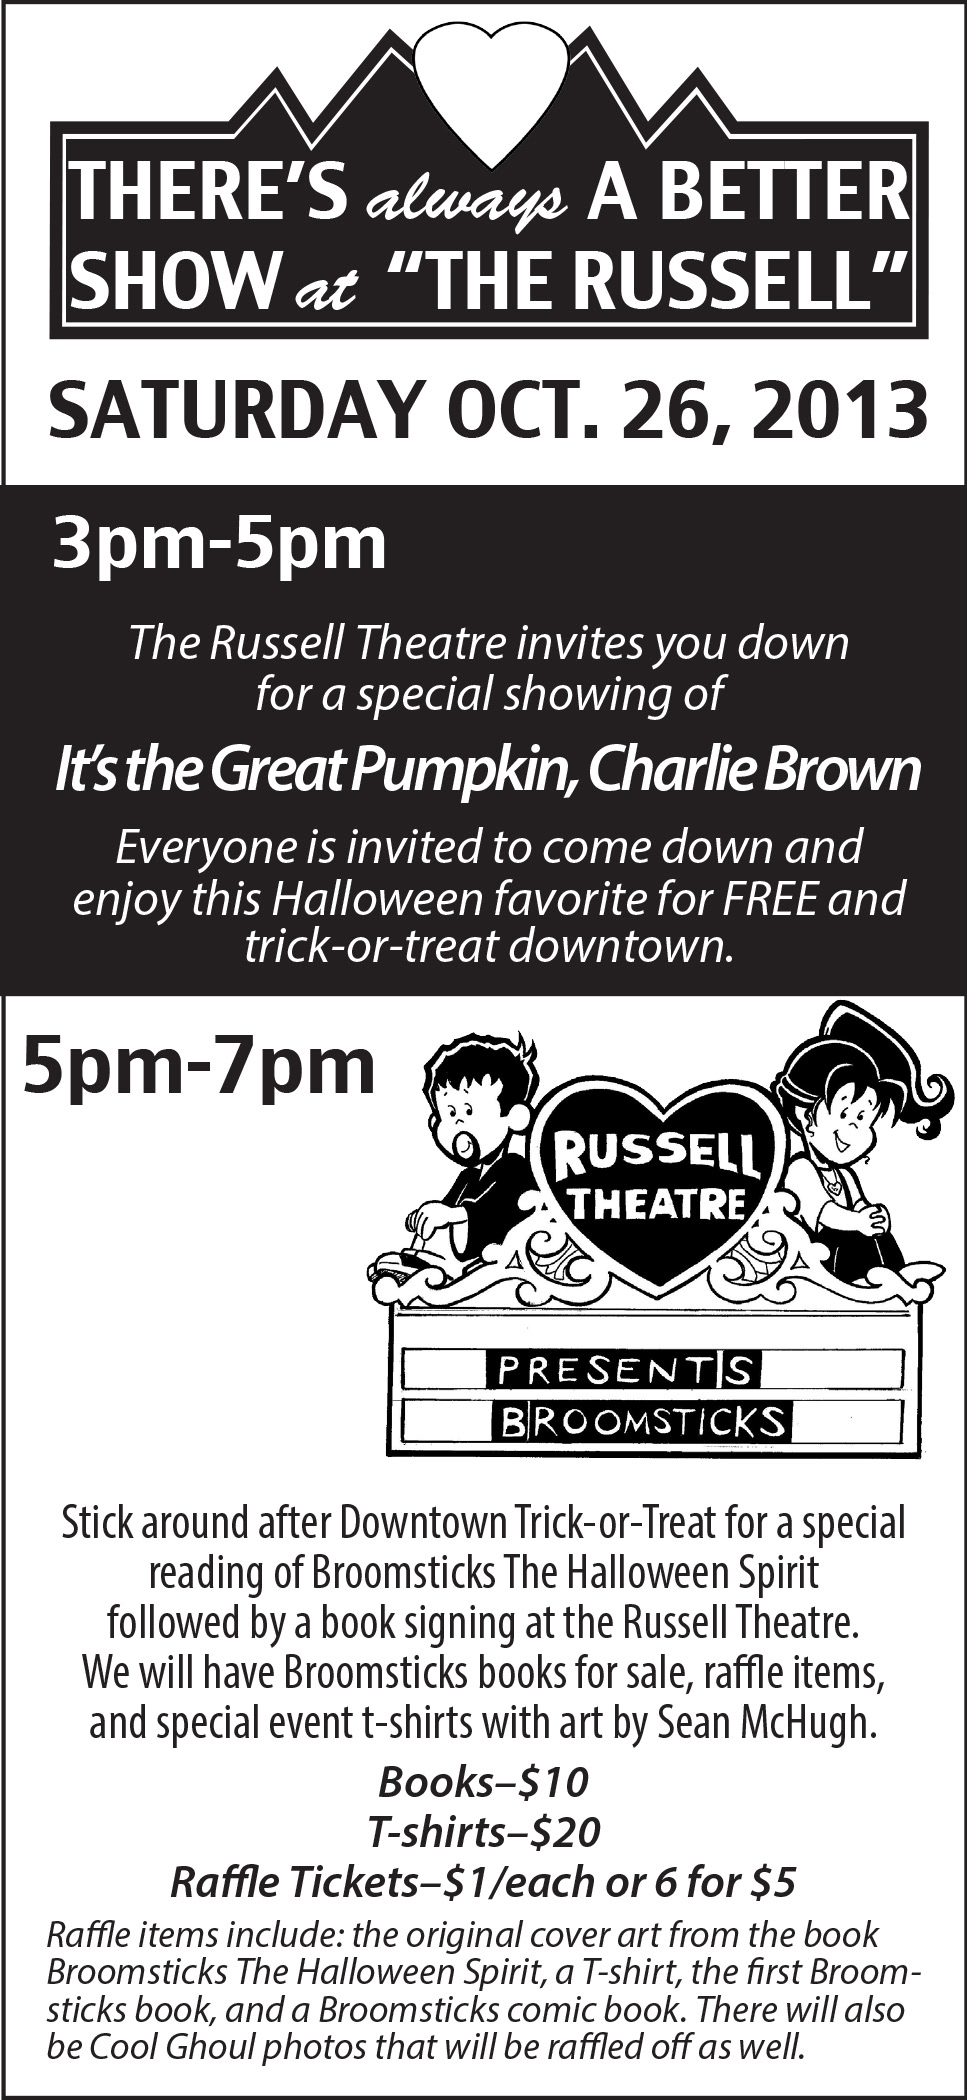 broomsticks maysville Kentucky Russell Theatre book signing vintage Theatre movie atmospheric theatre Halloween Event event planning